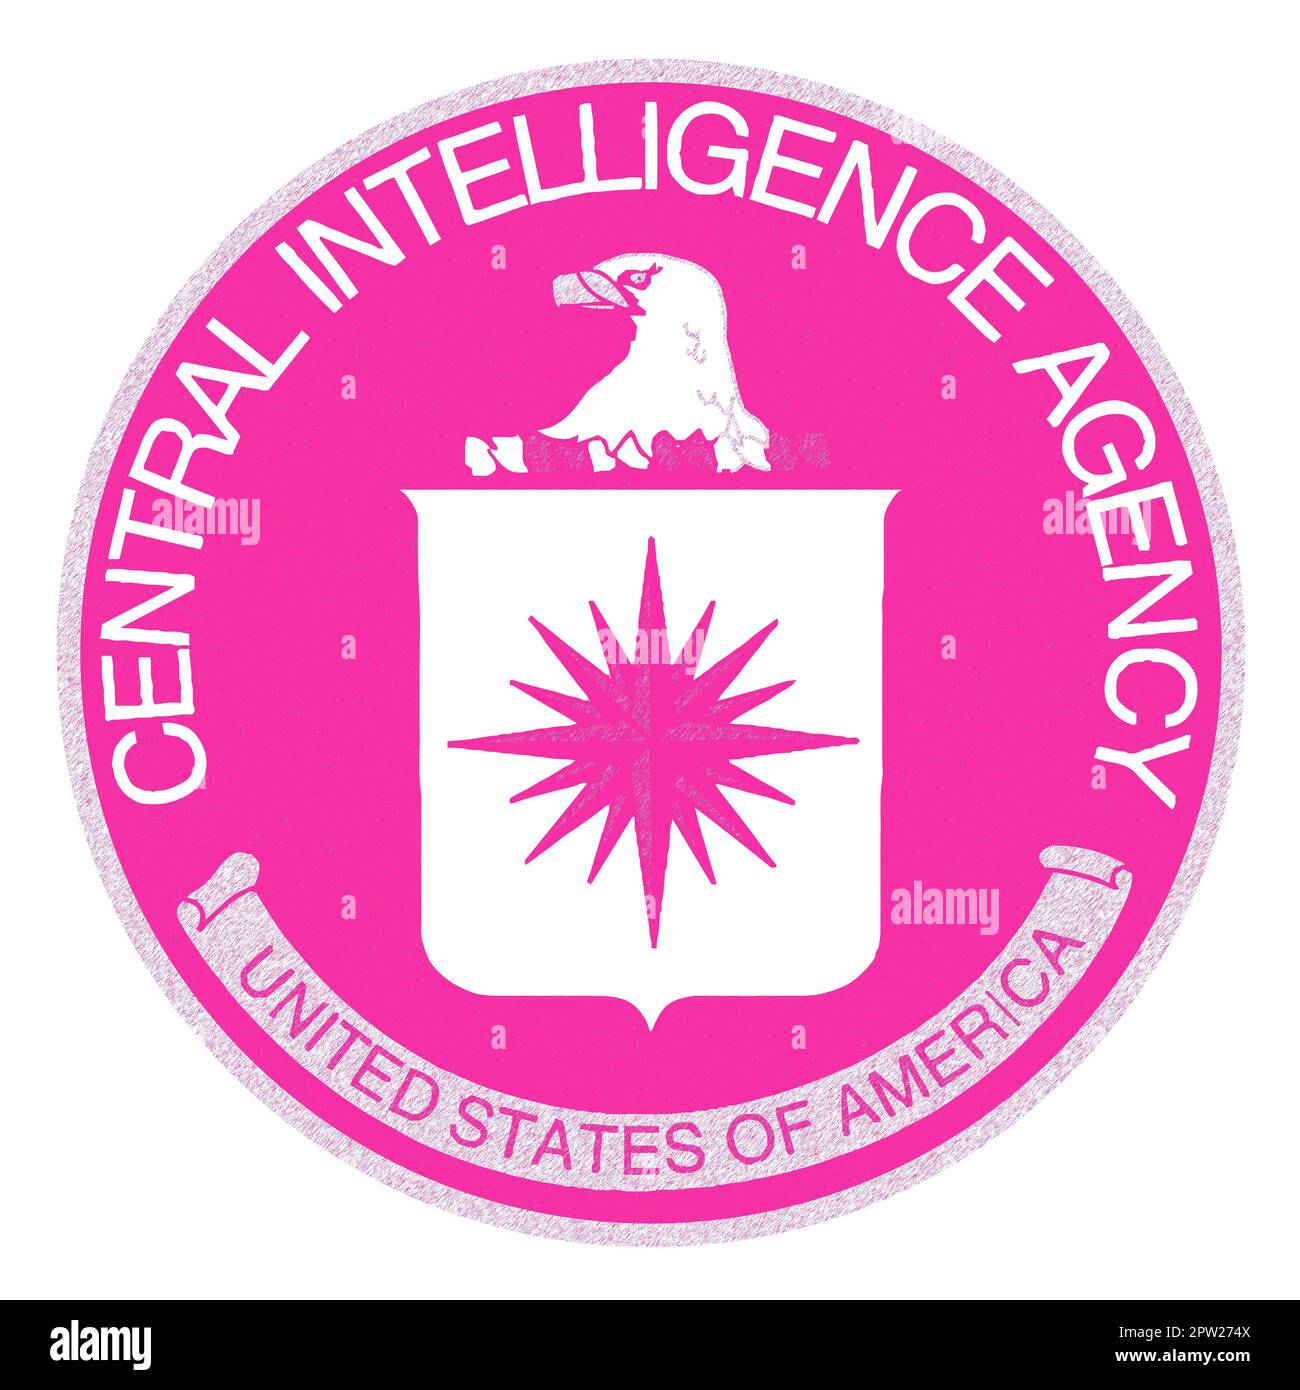 Logo of The Central Intelligence Agency of the United States of America in pink background Stock Photo